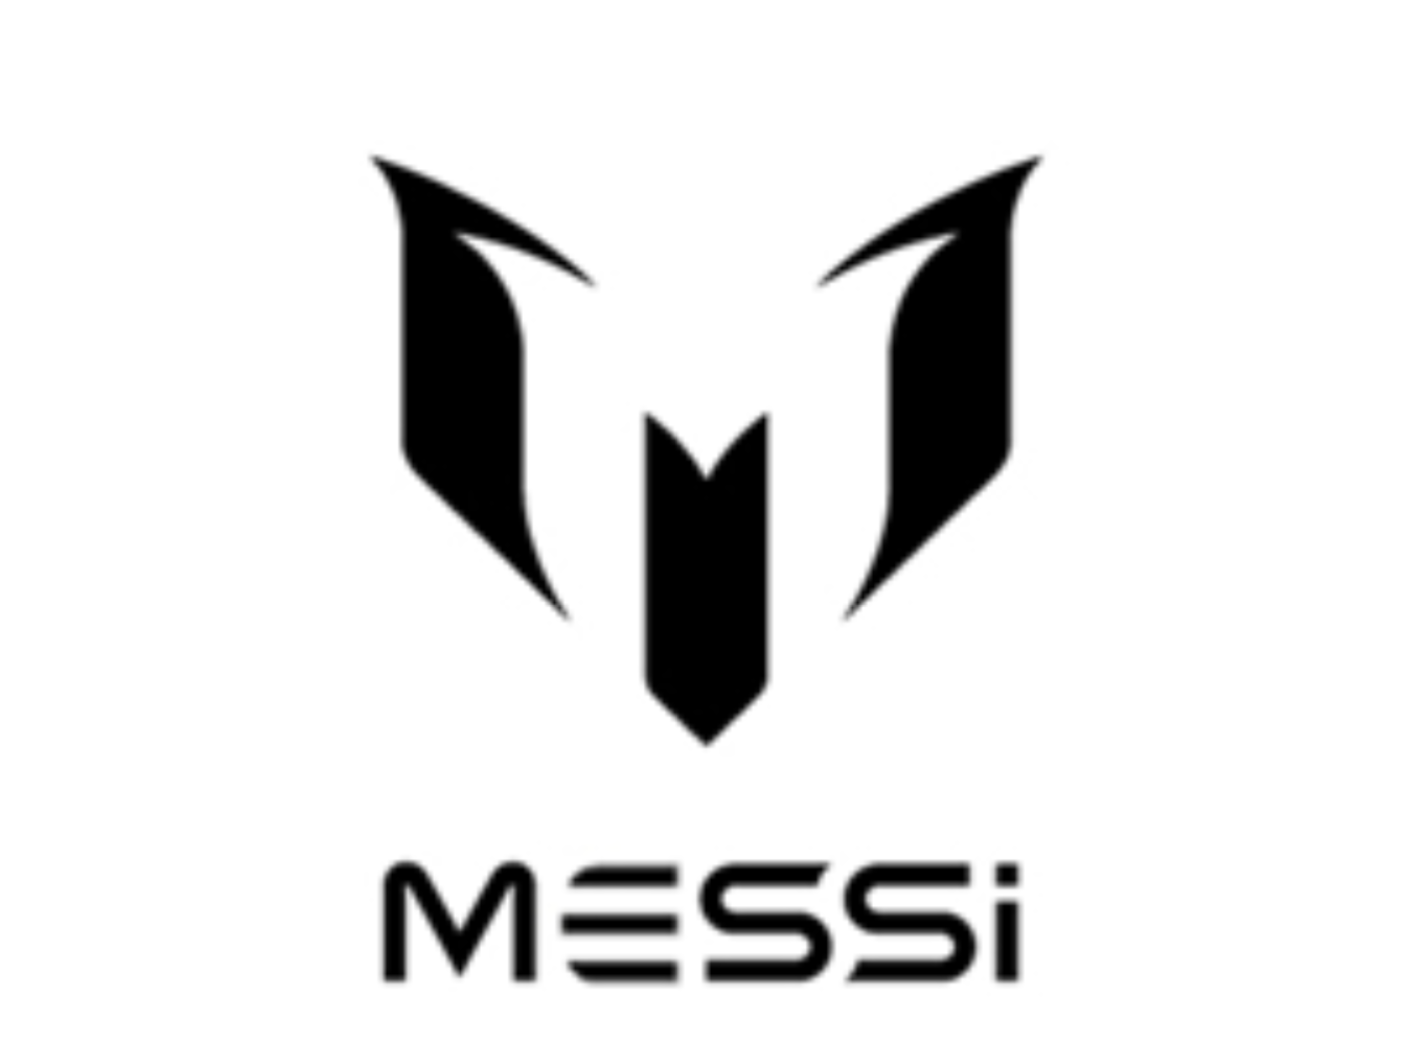 Download Luxury Lionel Messi Logo Wallpaper Best Football Hd - Messi PNG  Image with No Background - PNGkey.com